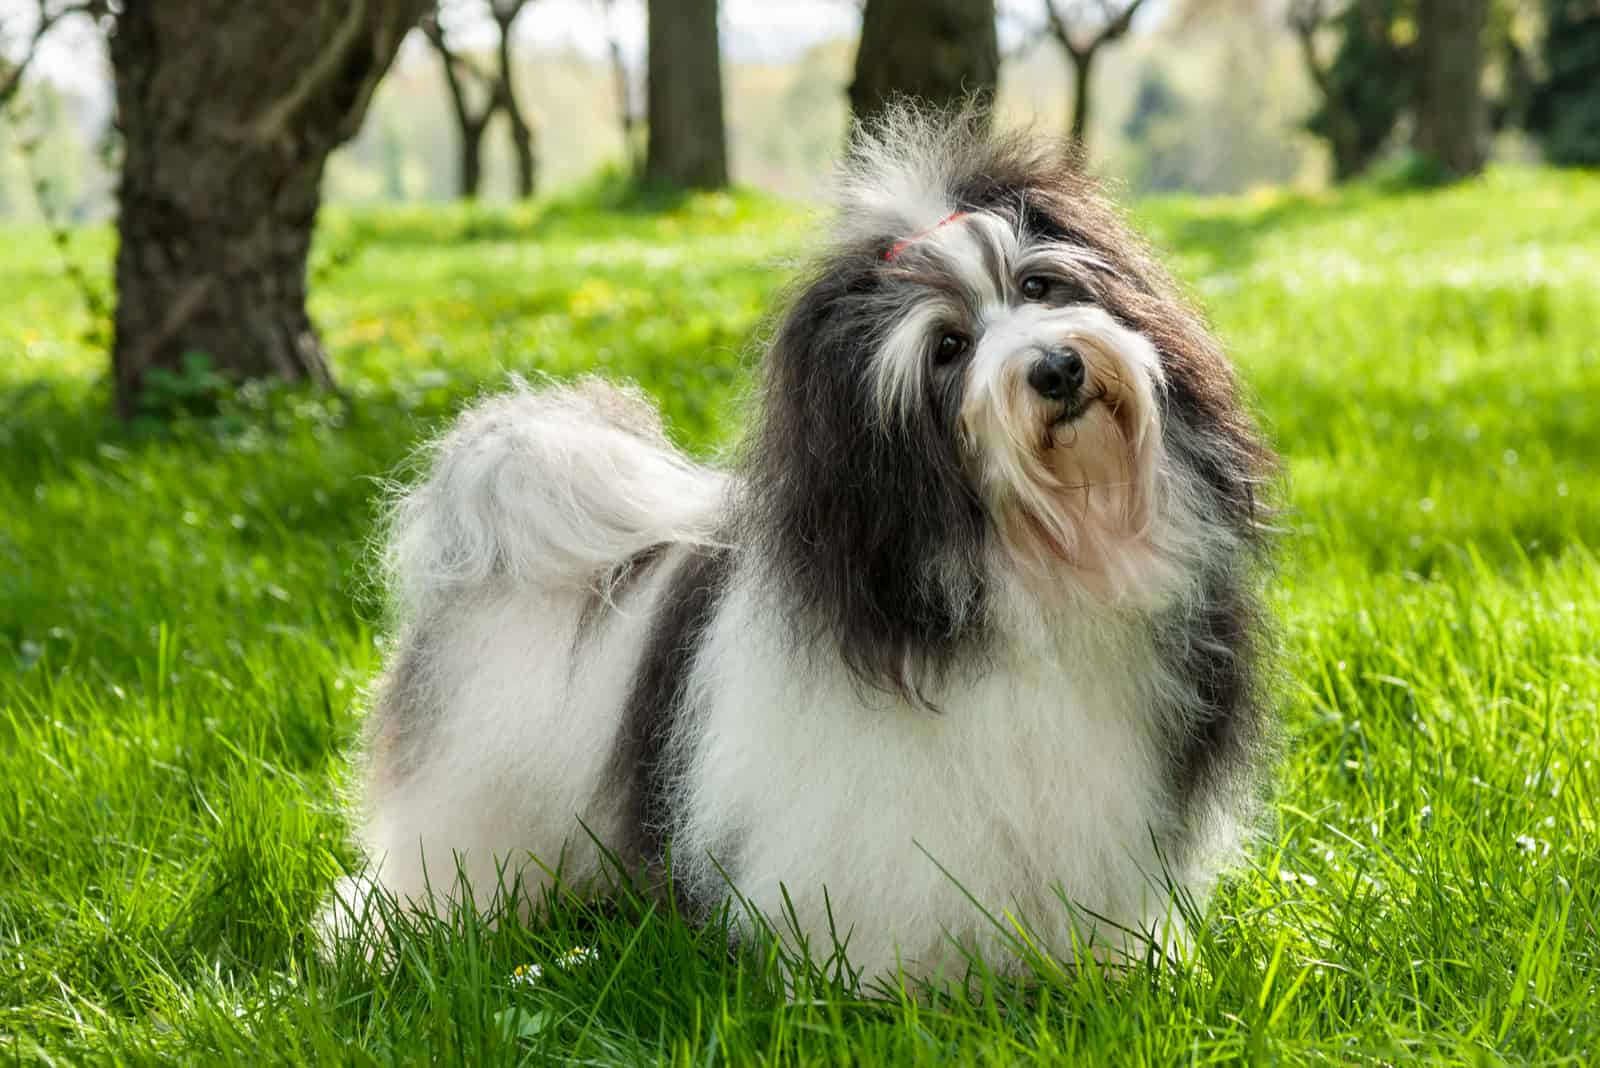 Cute Havanese dog is standing in a beautiful sunny grassy field